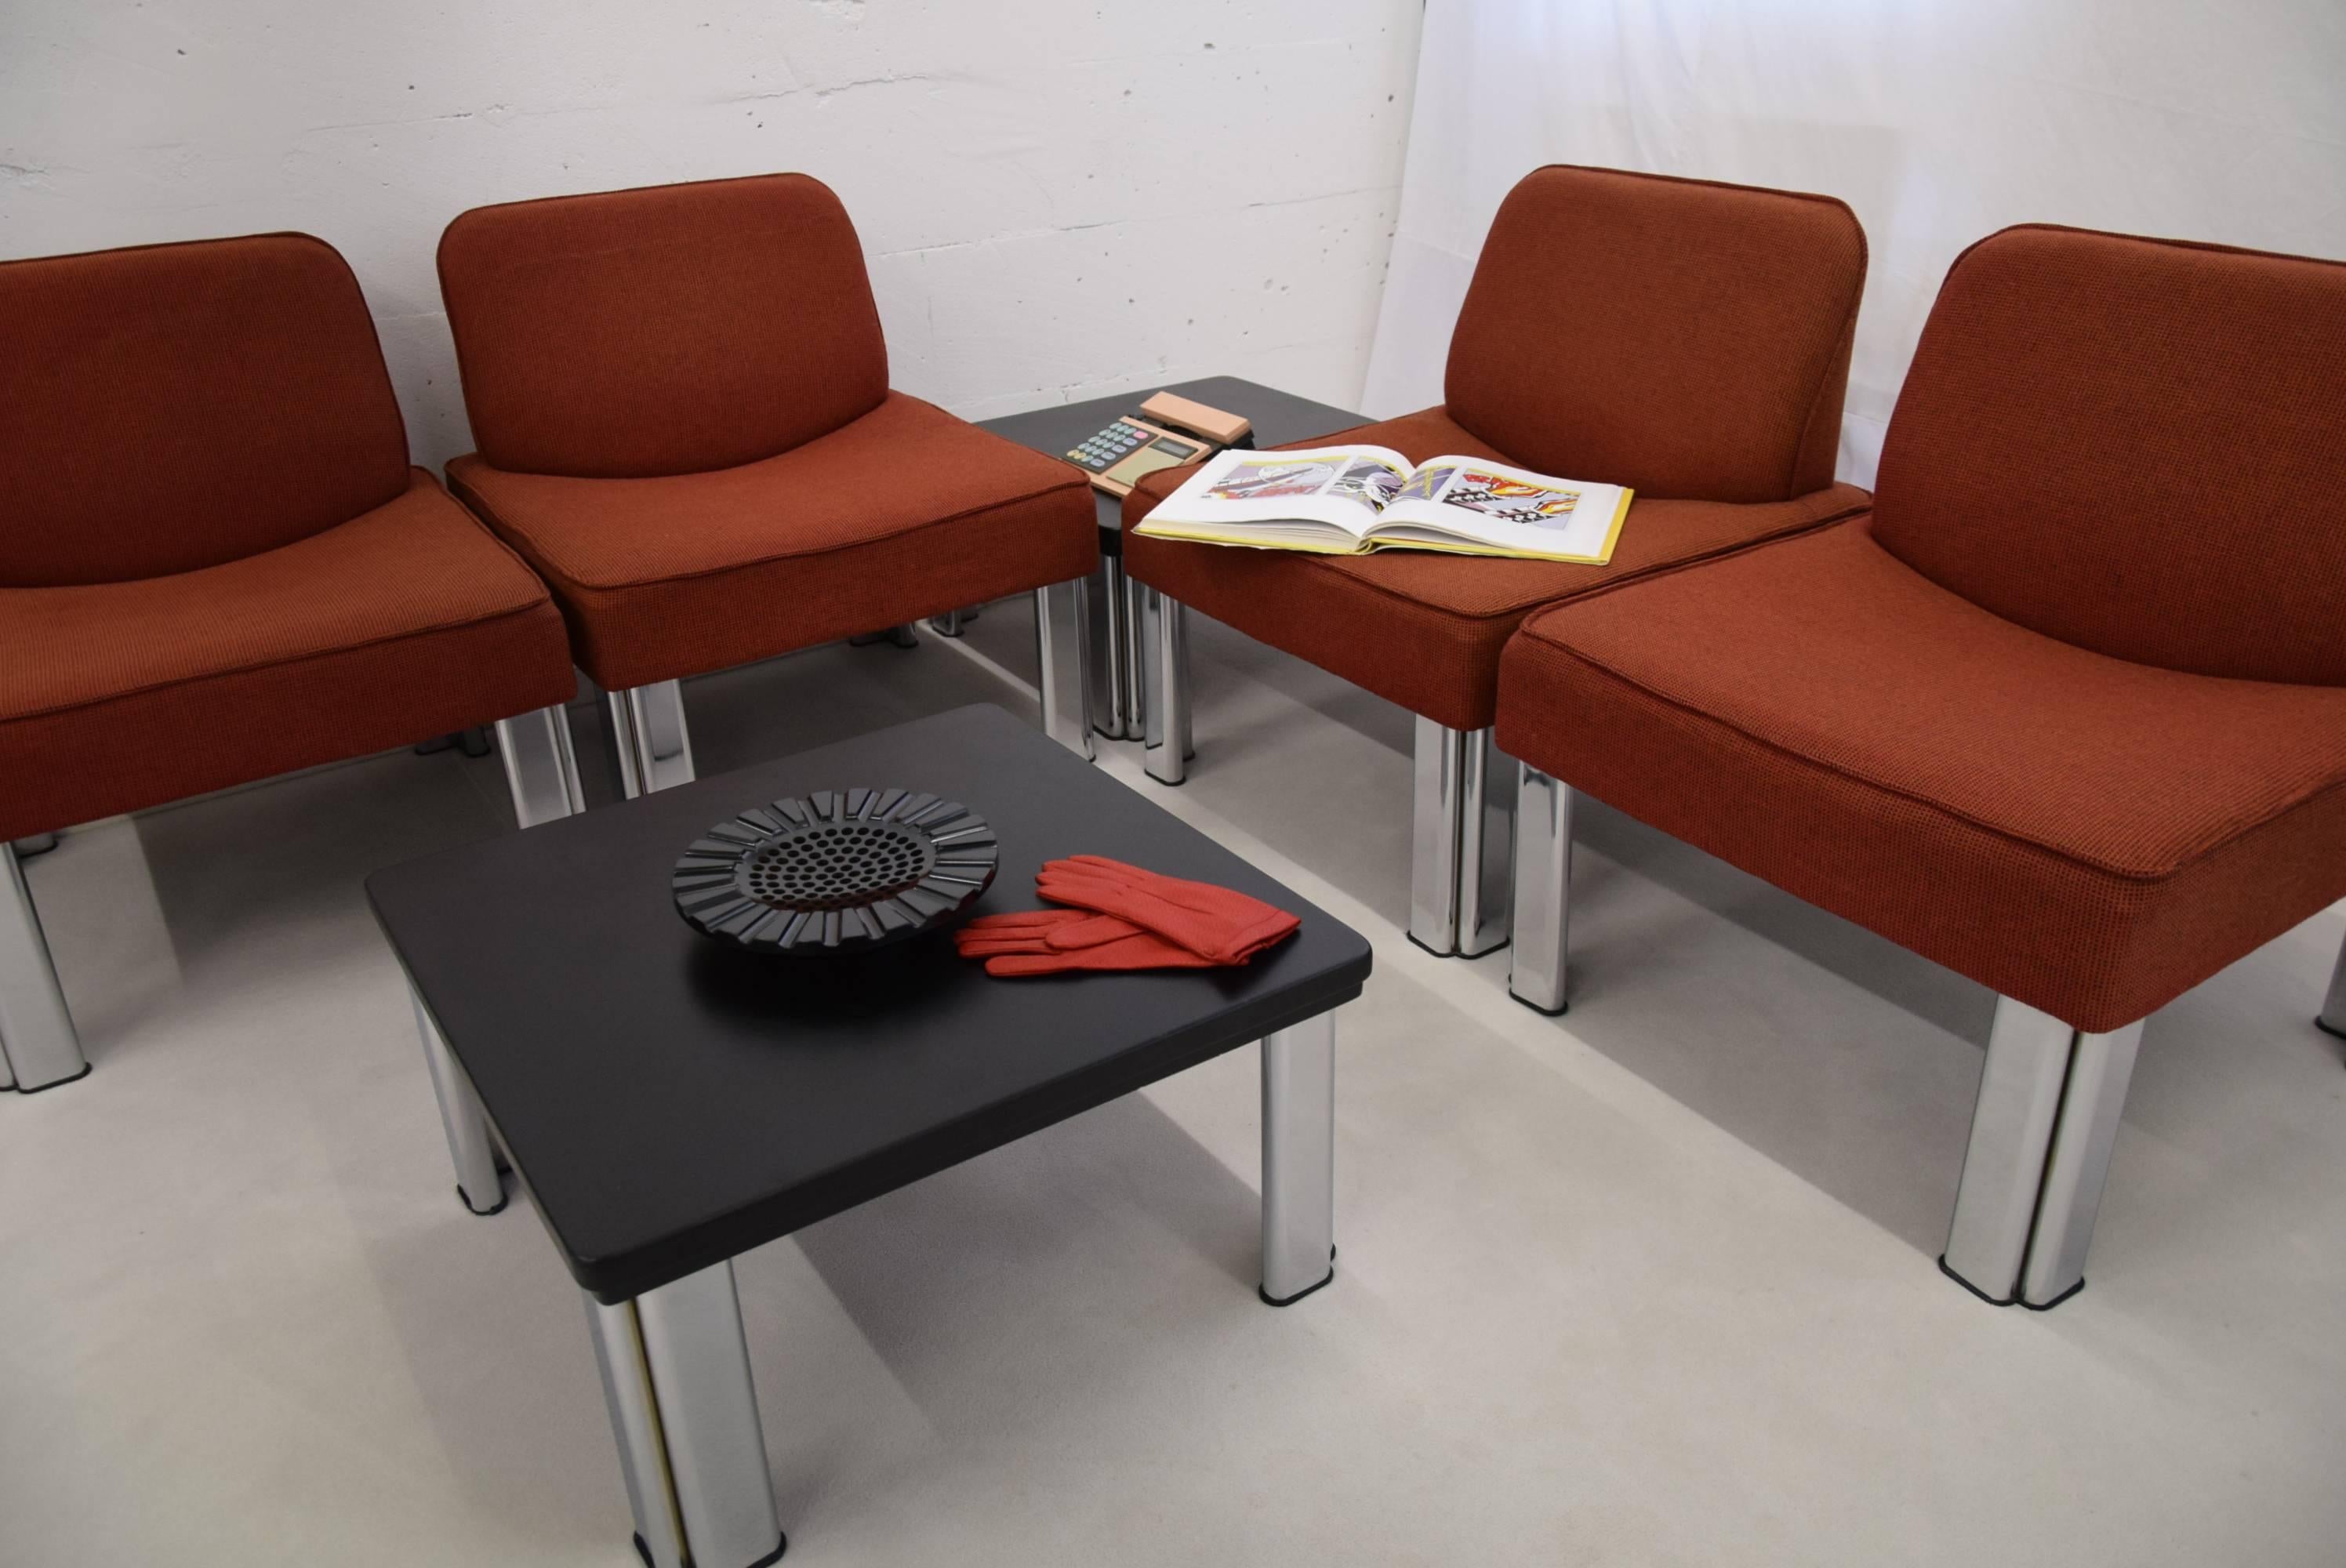 Upholstery Mid-Century Modern Reception Ensemble by Evertaut